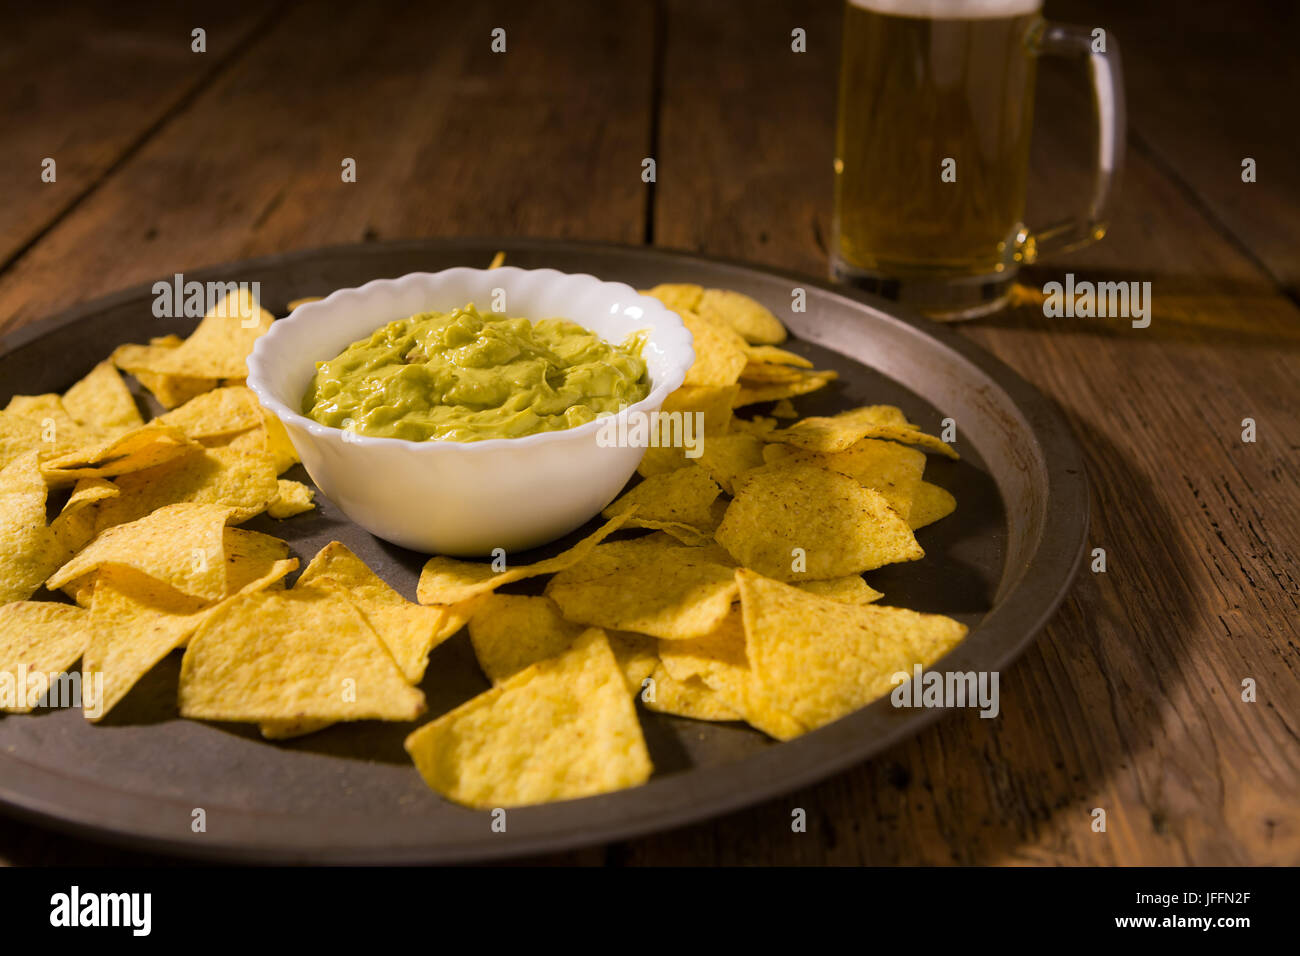 Nachos chips, salsa guacamole and beer Stock Photo